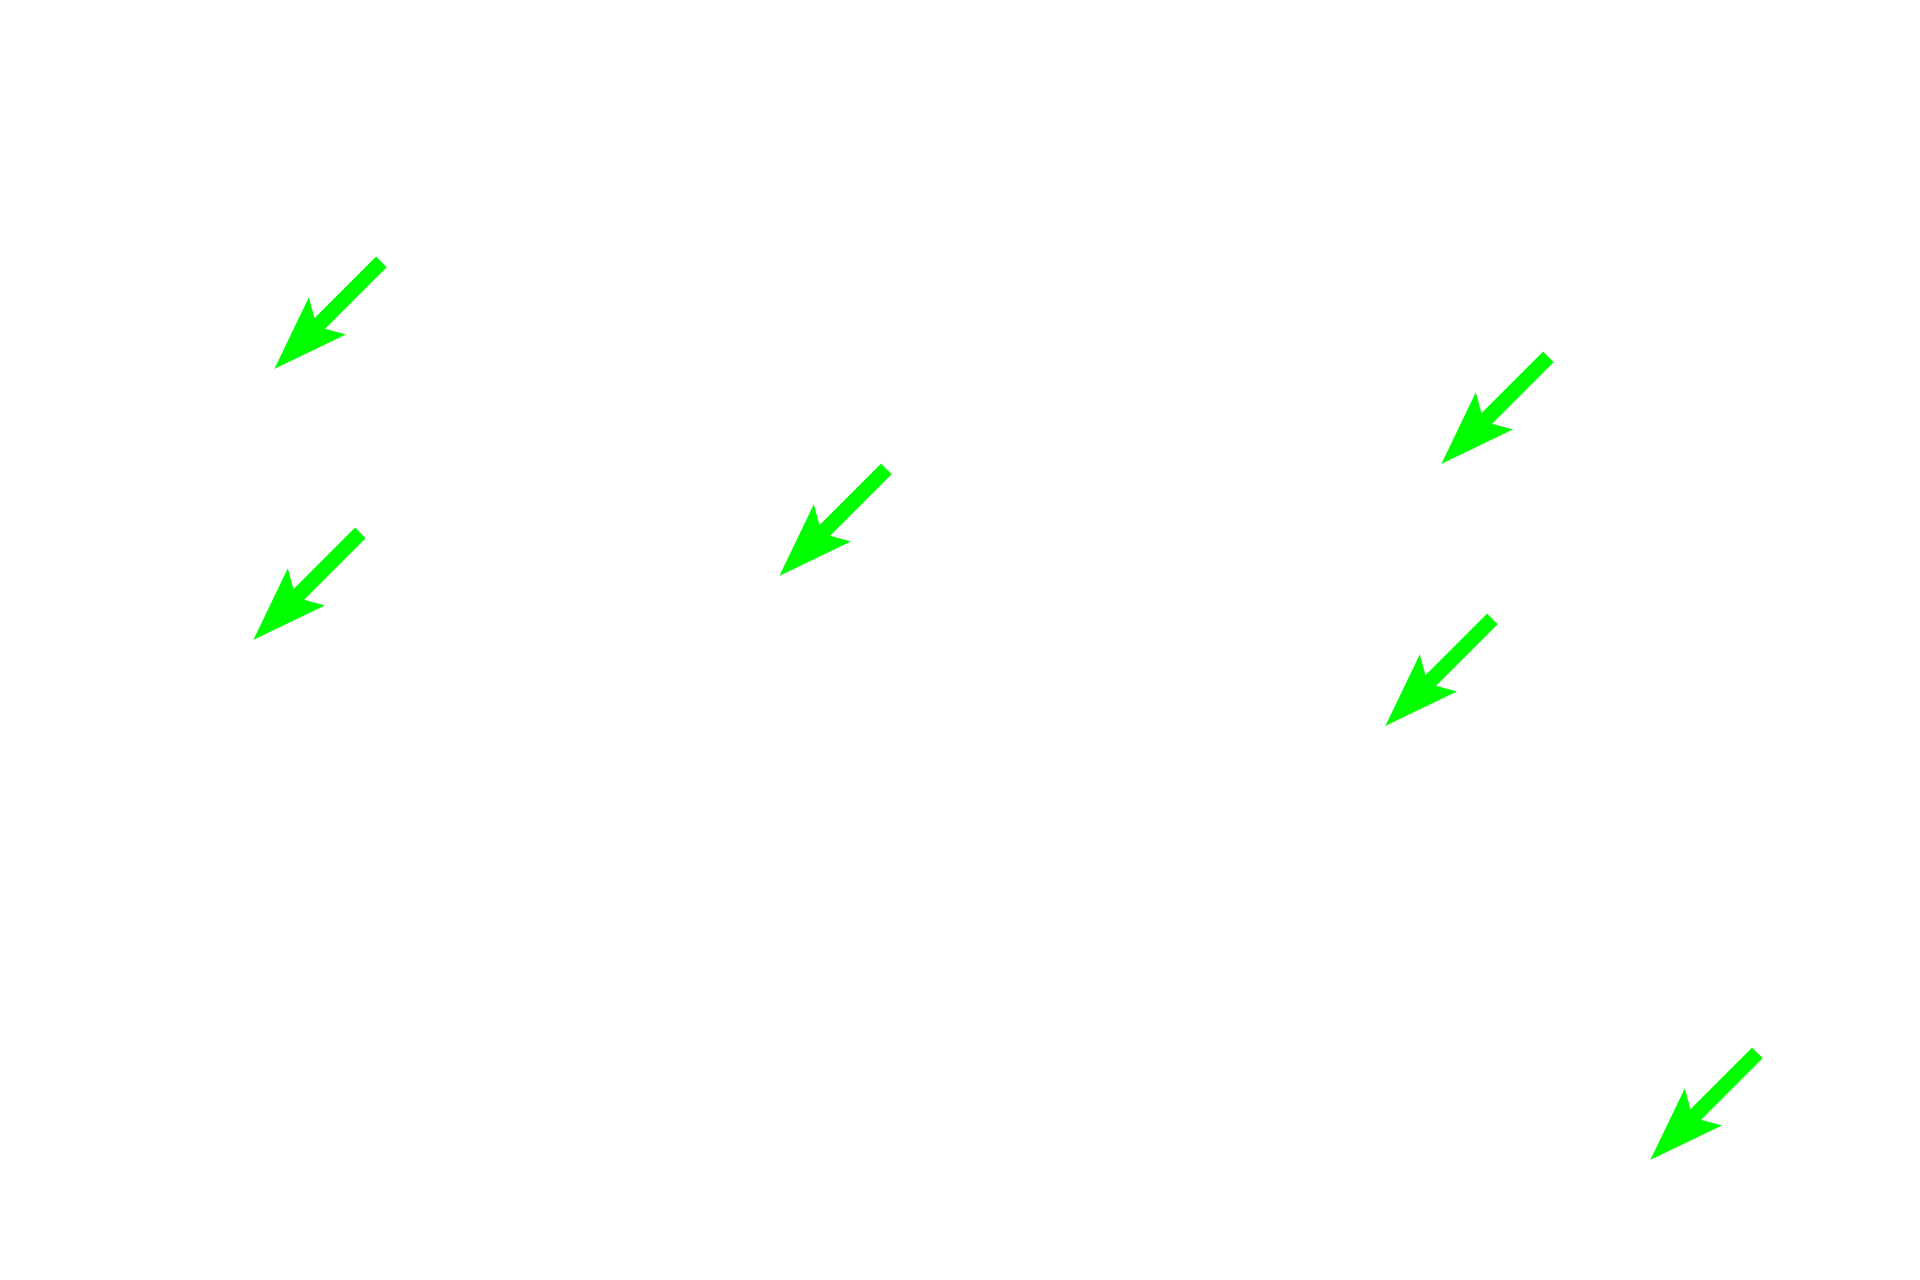 Collagen fibers  <p>Dense connective tissue is further subdivided into irregular and regular categories, based the arrangement of the collagen fibers. In dense irregular connective tissue (left) fibers are multidirectional and interlaced. In dense regular connective tissue (right) fibers are arranged in a highly ordered, parallel manner. Dense irregular is present throughout the body while dense regular is highly restricted, forming tendons and ligaments. In both irregular and regular, the cells are almost exclusively fibroblasts. 400x, 400x</p>
